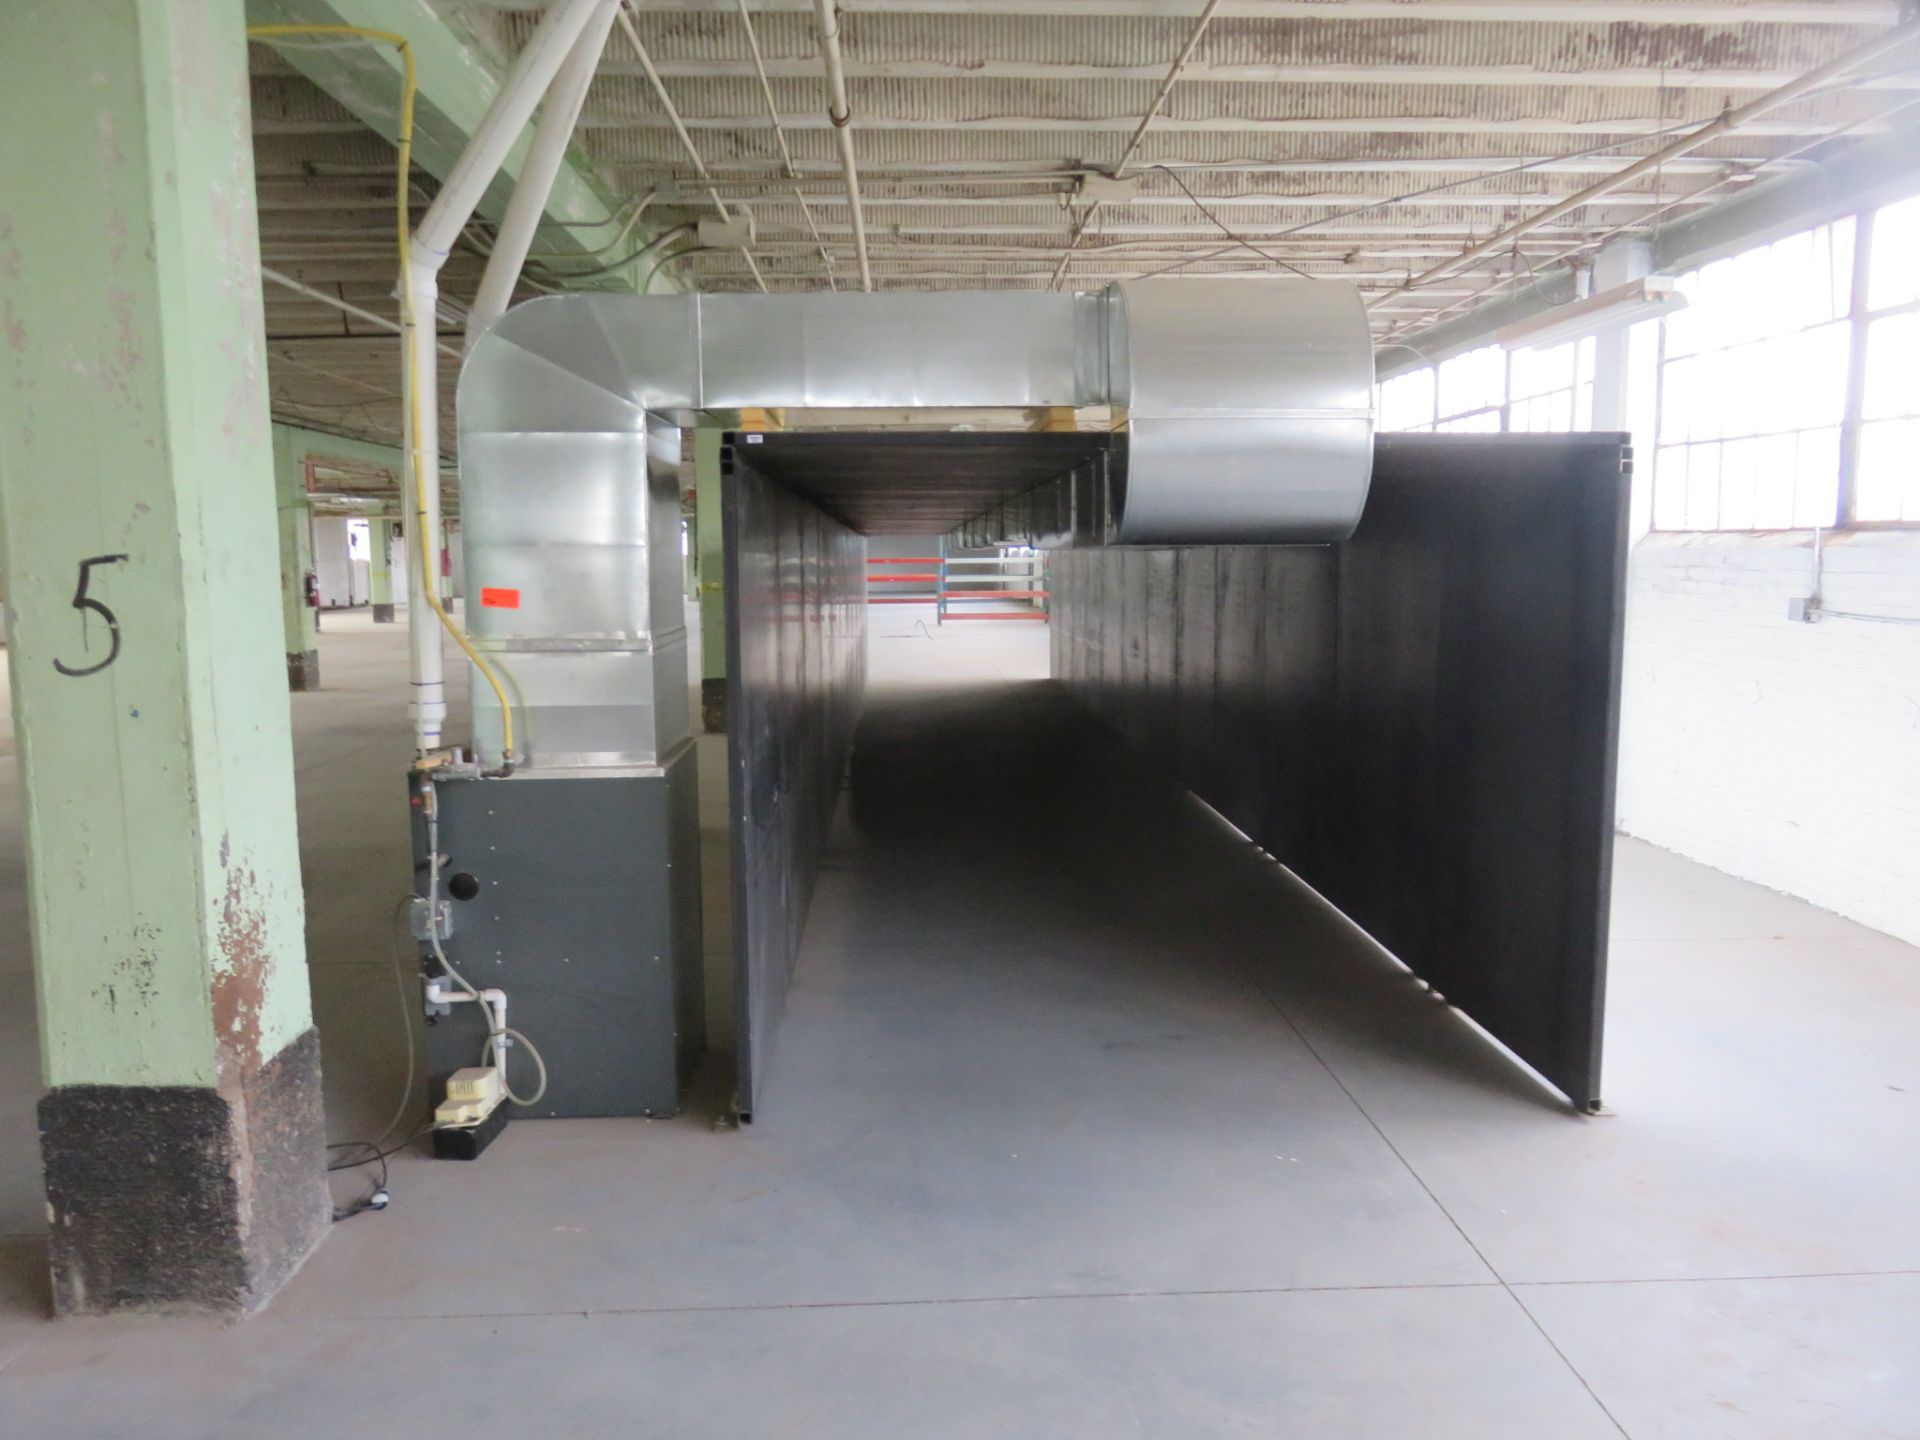 NEW Oven Paint Drying Line w/ Gas Amana Furnace approx. 48' x 8' x 6' - Image 2 of 4